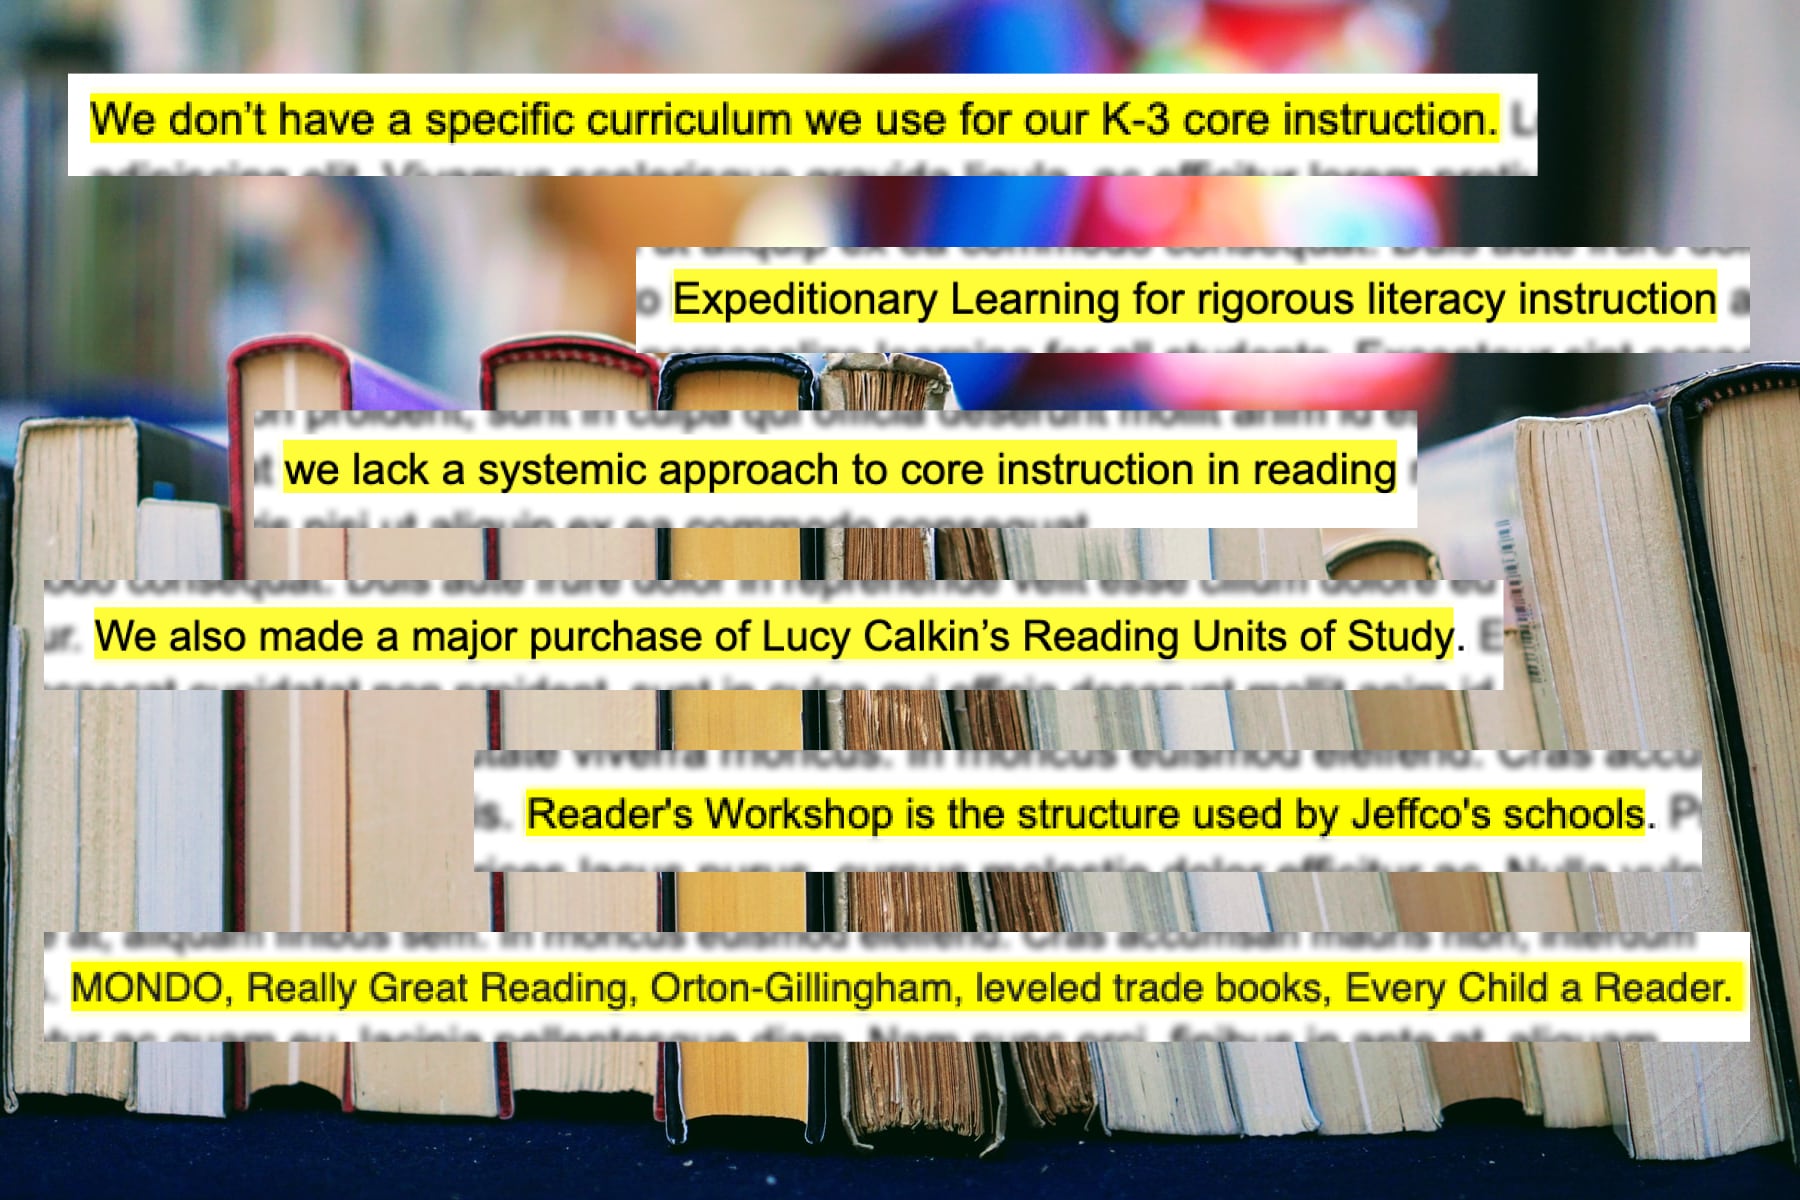 On a background of books, snippets show Jeffco principal responses about their core reading curriculum.